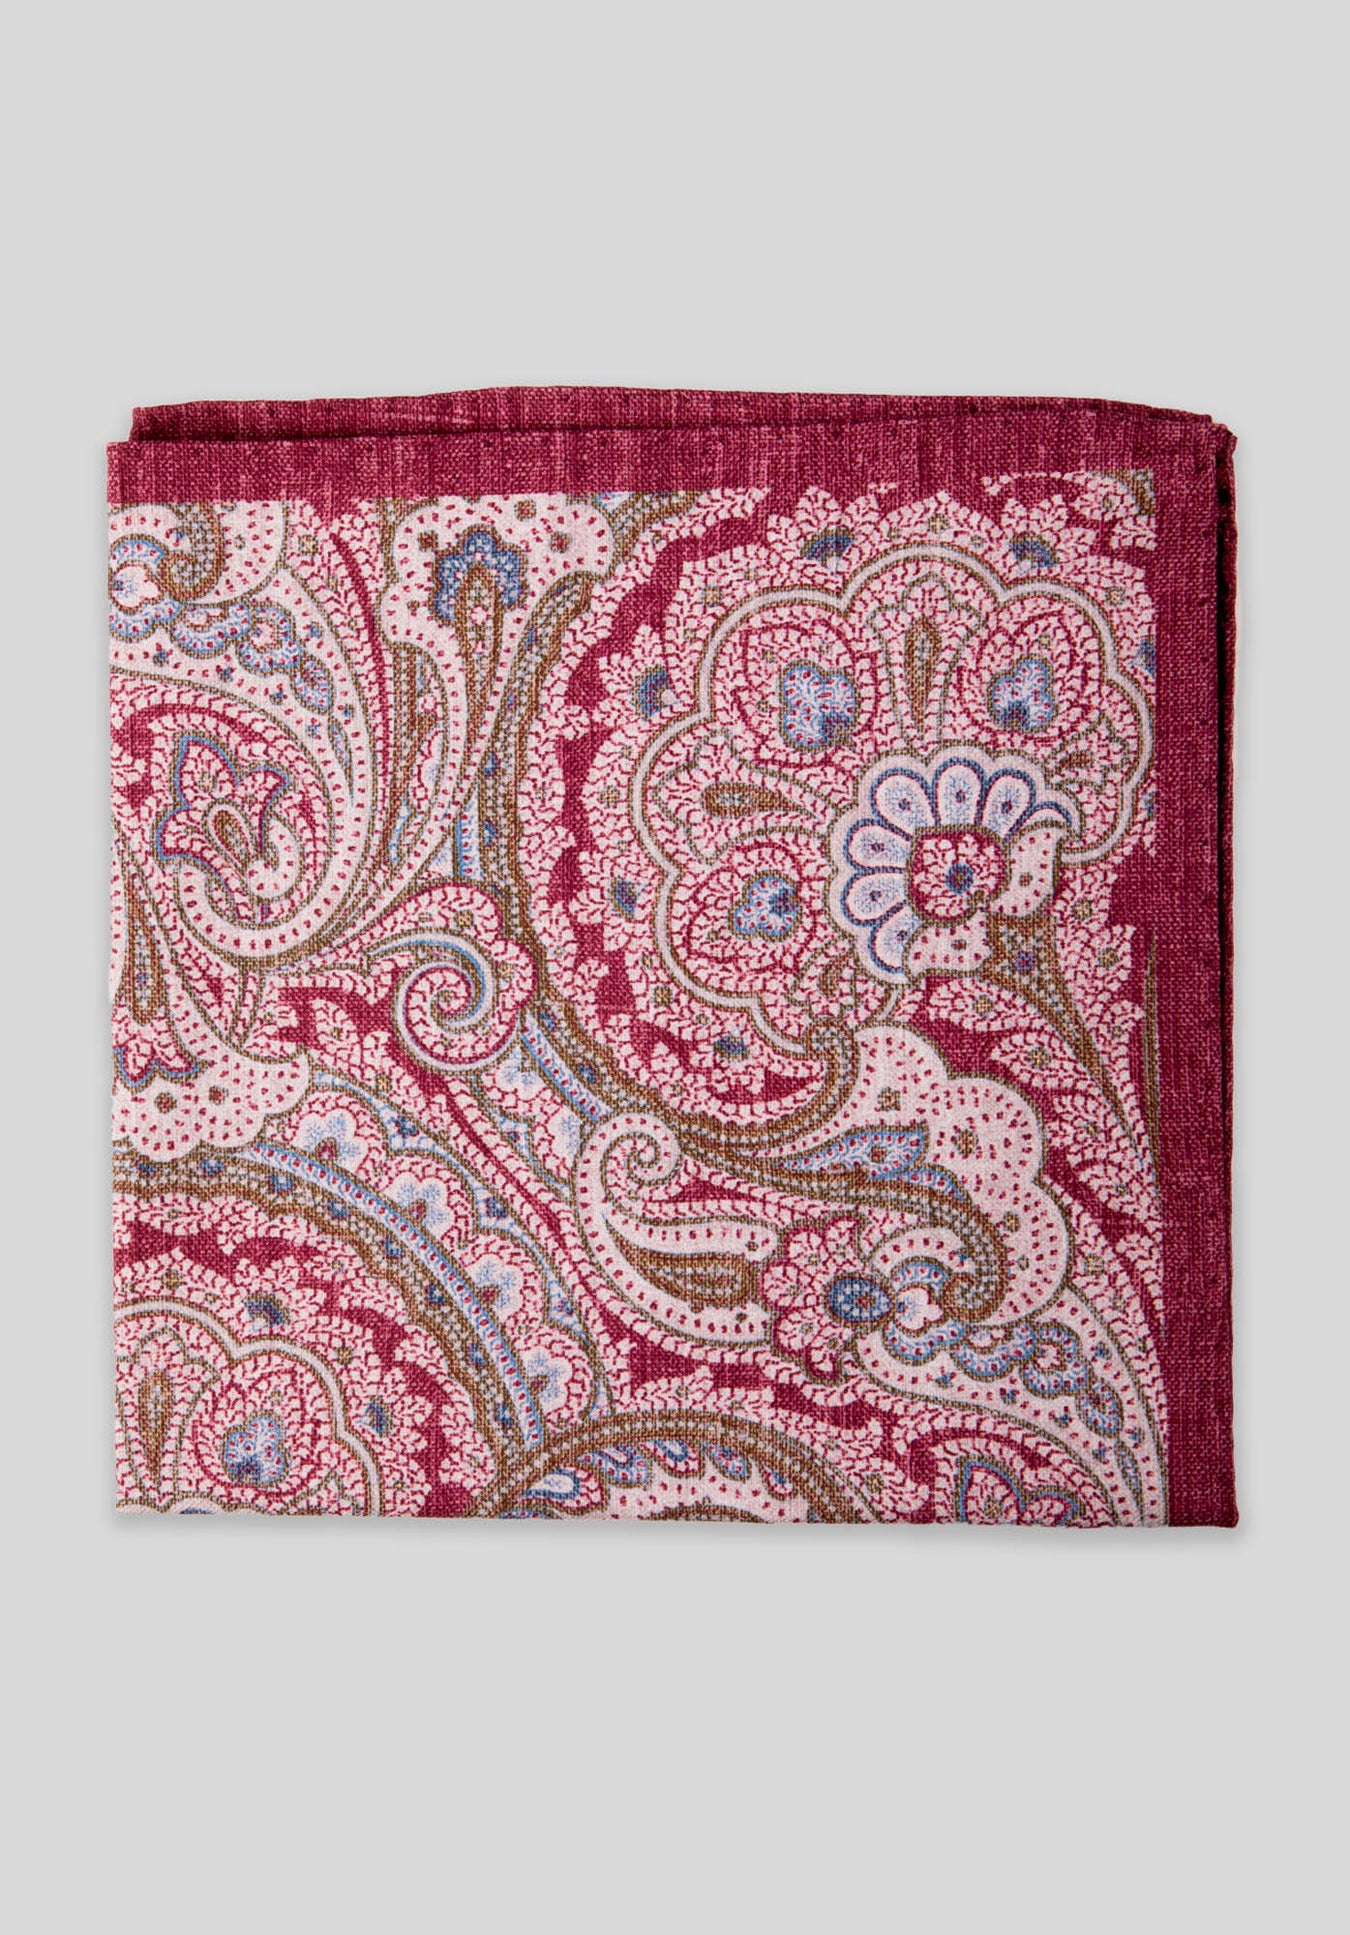 WASHED PAISLEY DOUBLE PRINT POCKET SQUARE